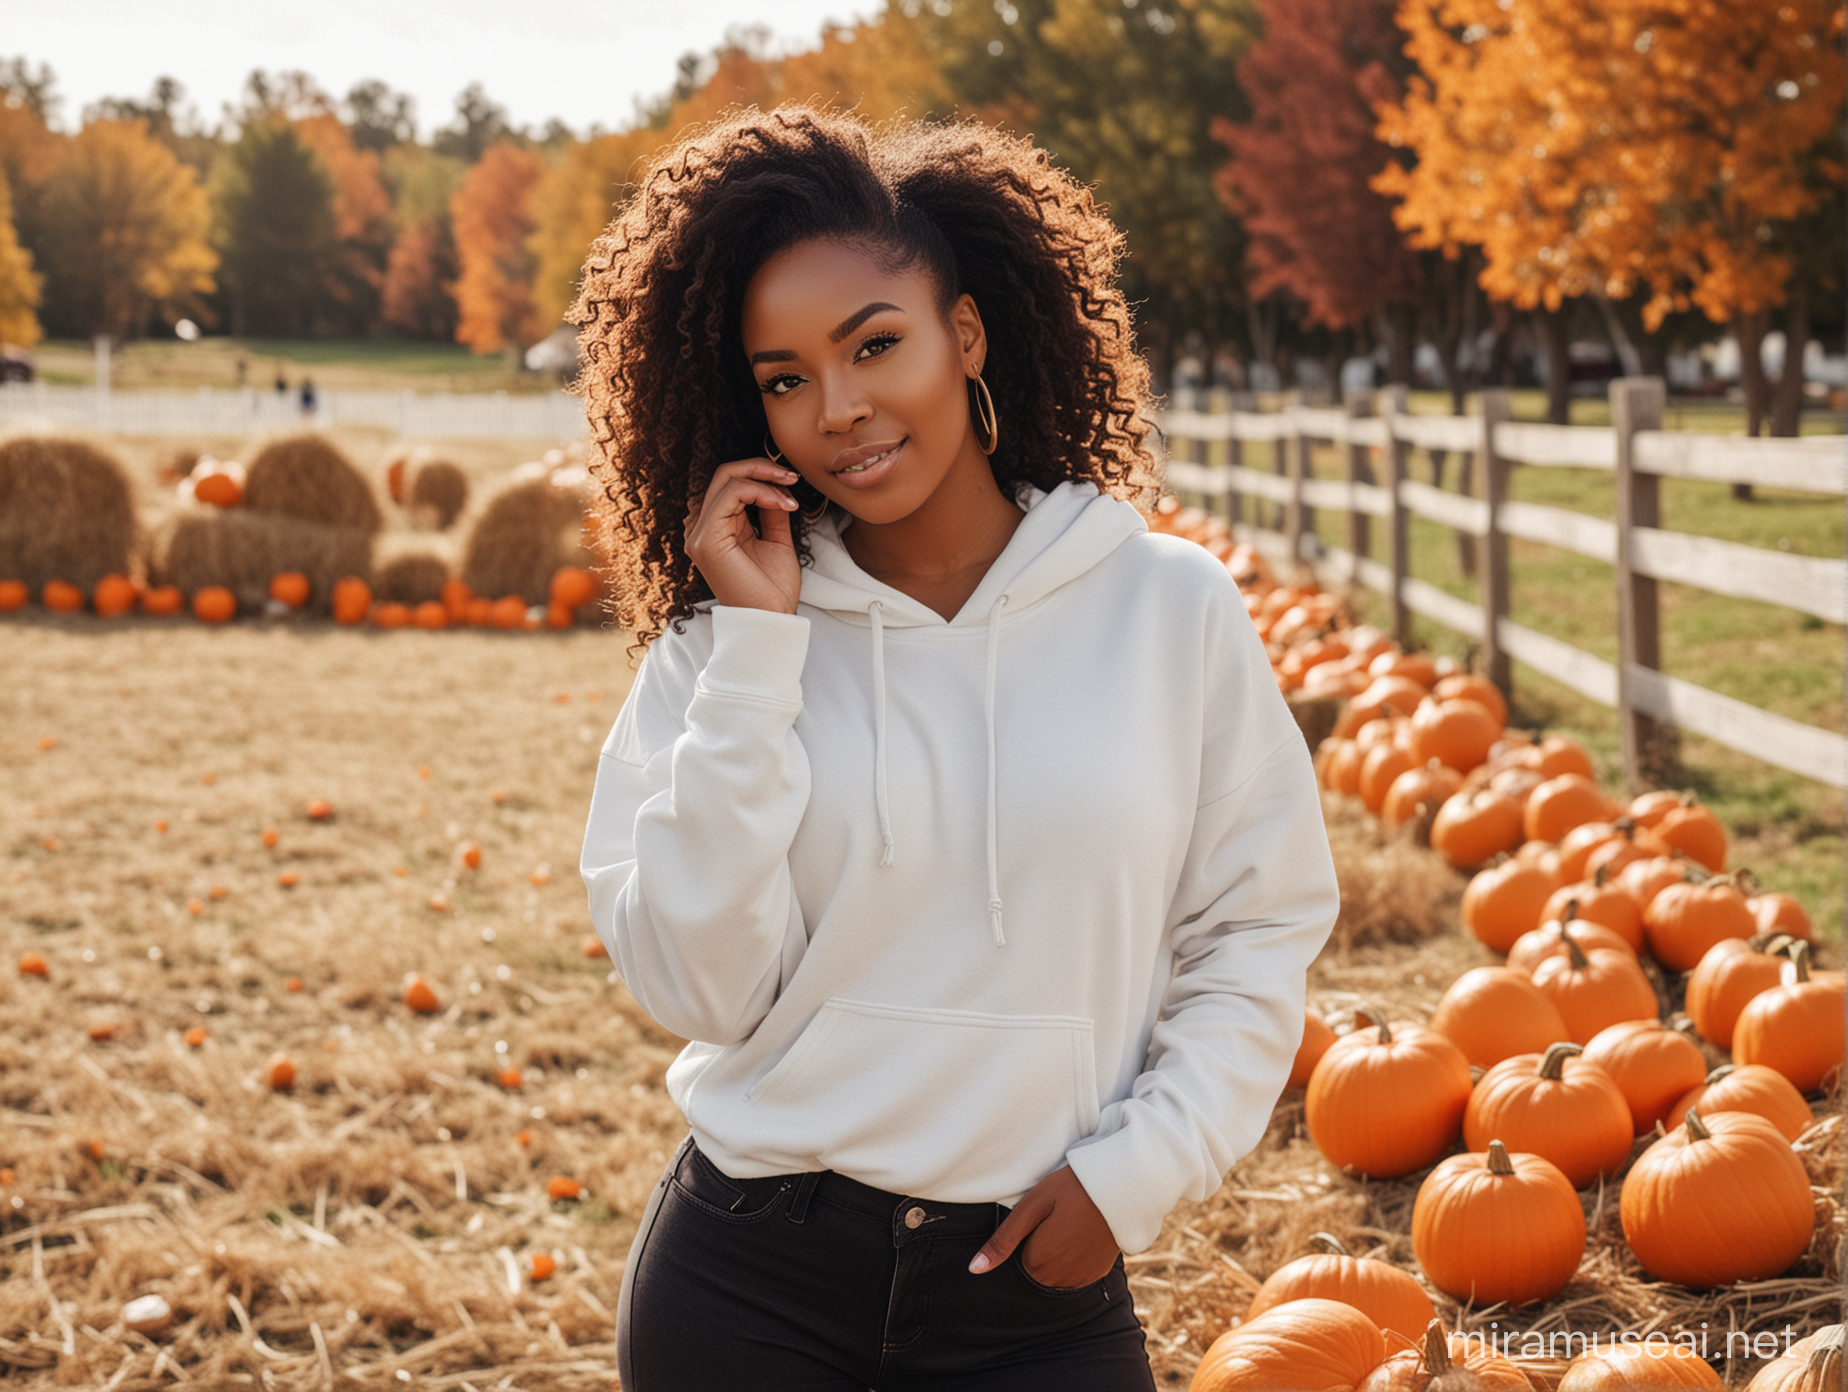 Create an image of a beautiful black women wearing a white hoodie and black jeans she is outside at the pumpkin patch with pumpkins hay and fall decor in the background. 